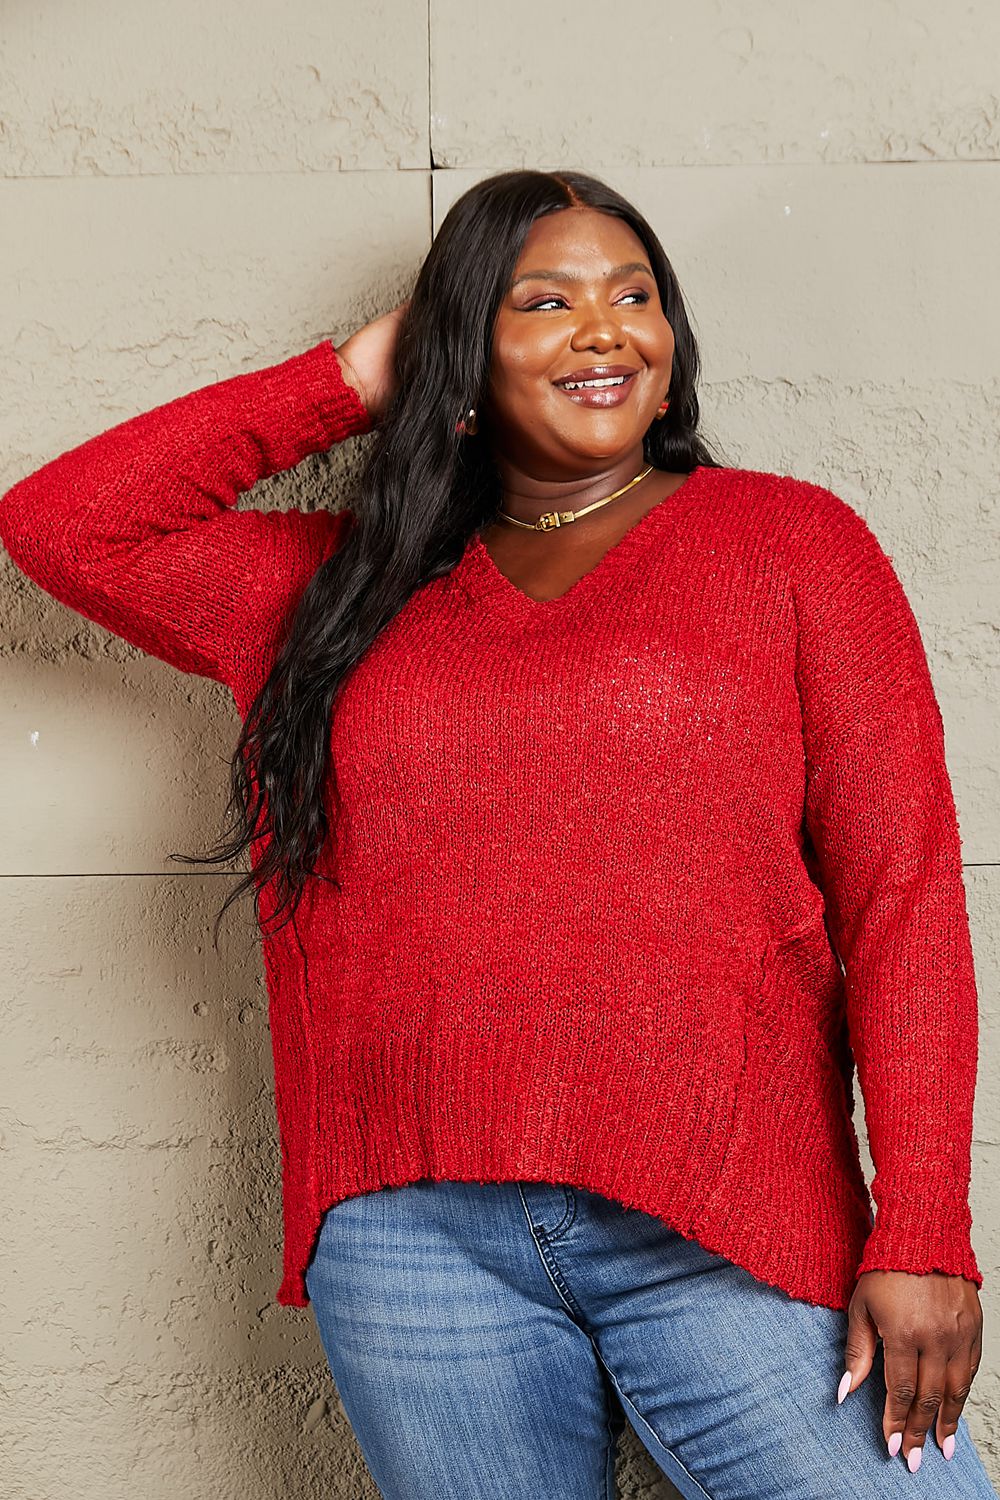 A Little Cozy Draped Detail Knit Sweater-Red Red Sweaters by Vim&Vigor | Vim&Vigor Boutique